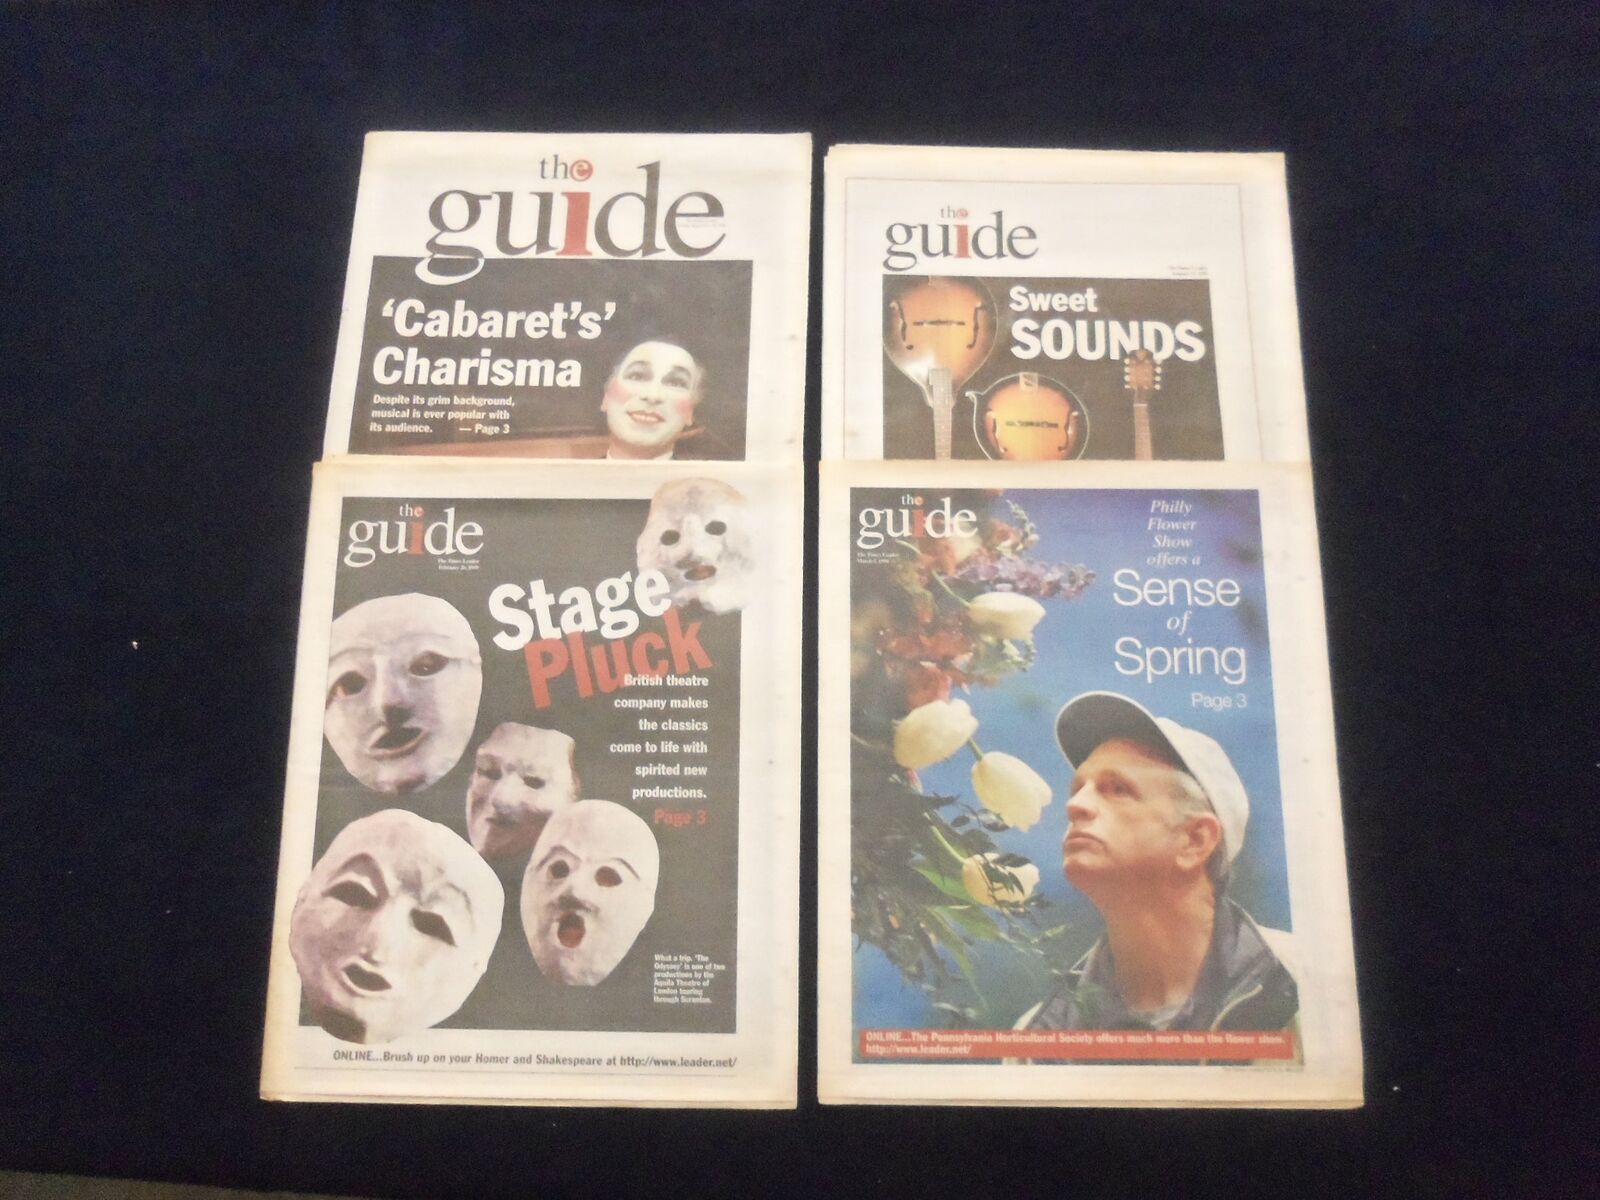 1998-99 WILKES-BARRE, PA TIMES LEADER NEWSPAPER - THE GUIDE - LOT OF 4 - NP 6218